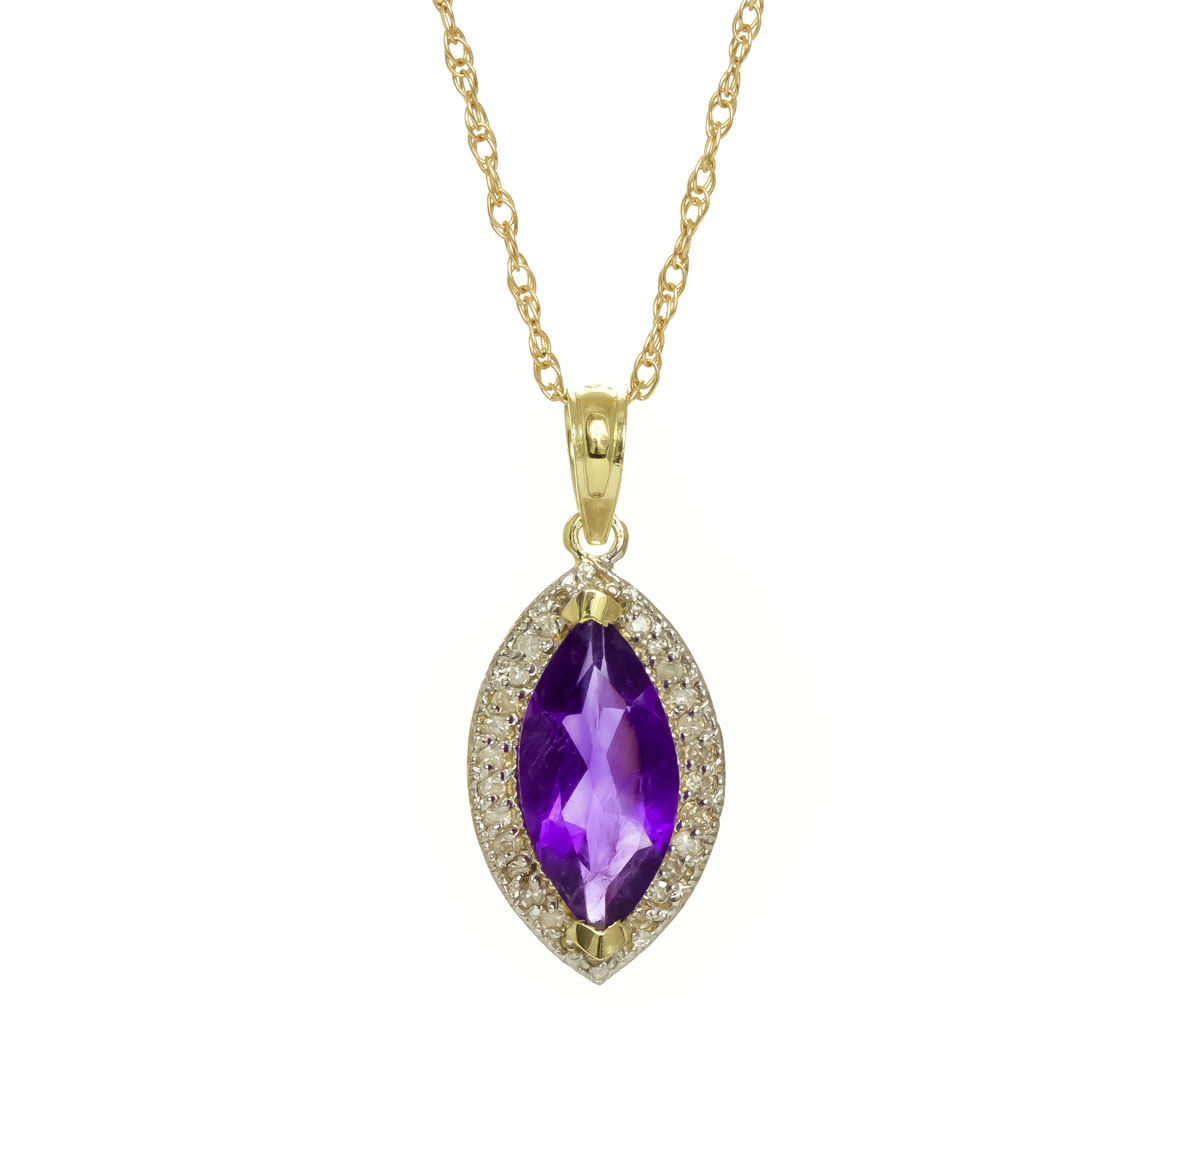 Amethyst Halo Pendant Necklace 1.8 ctw in 9ct Gold